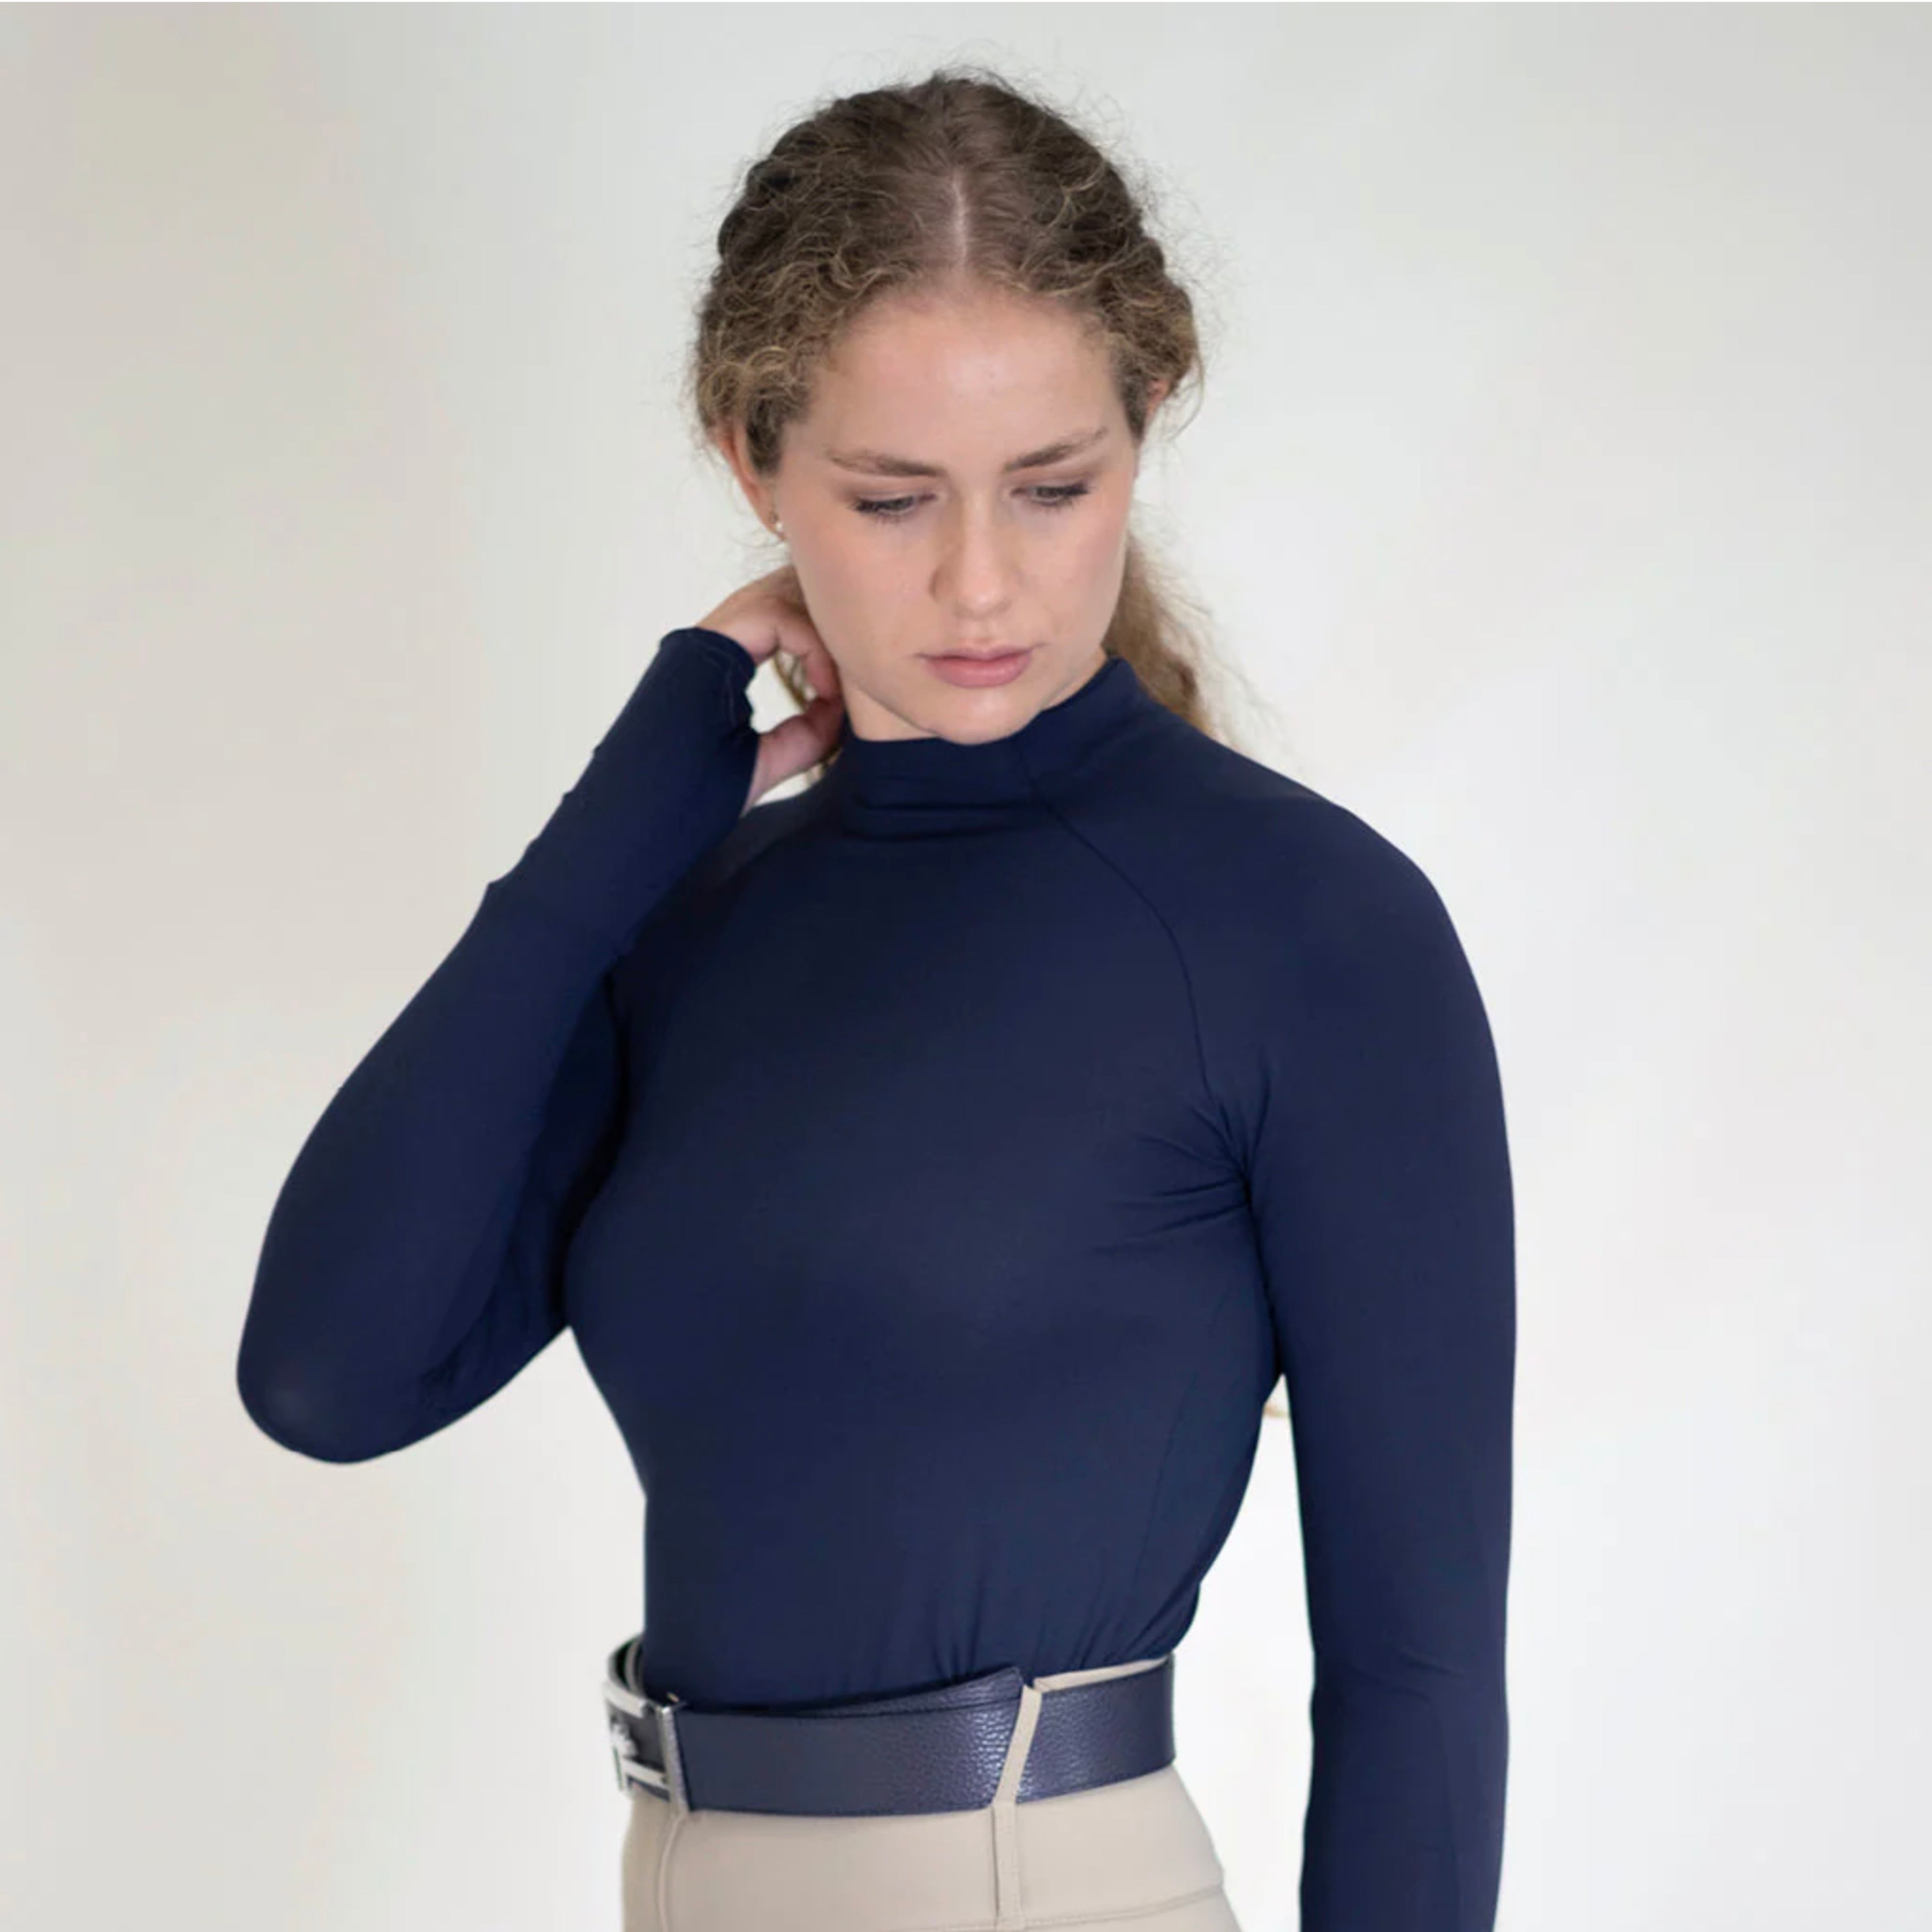 For Horses Wally Tech Mockneck ladies